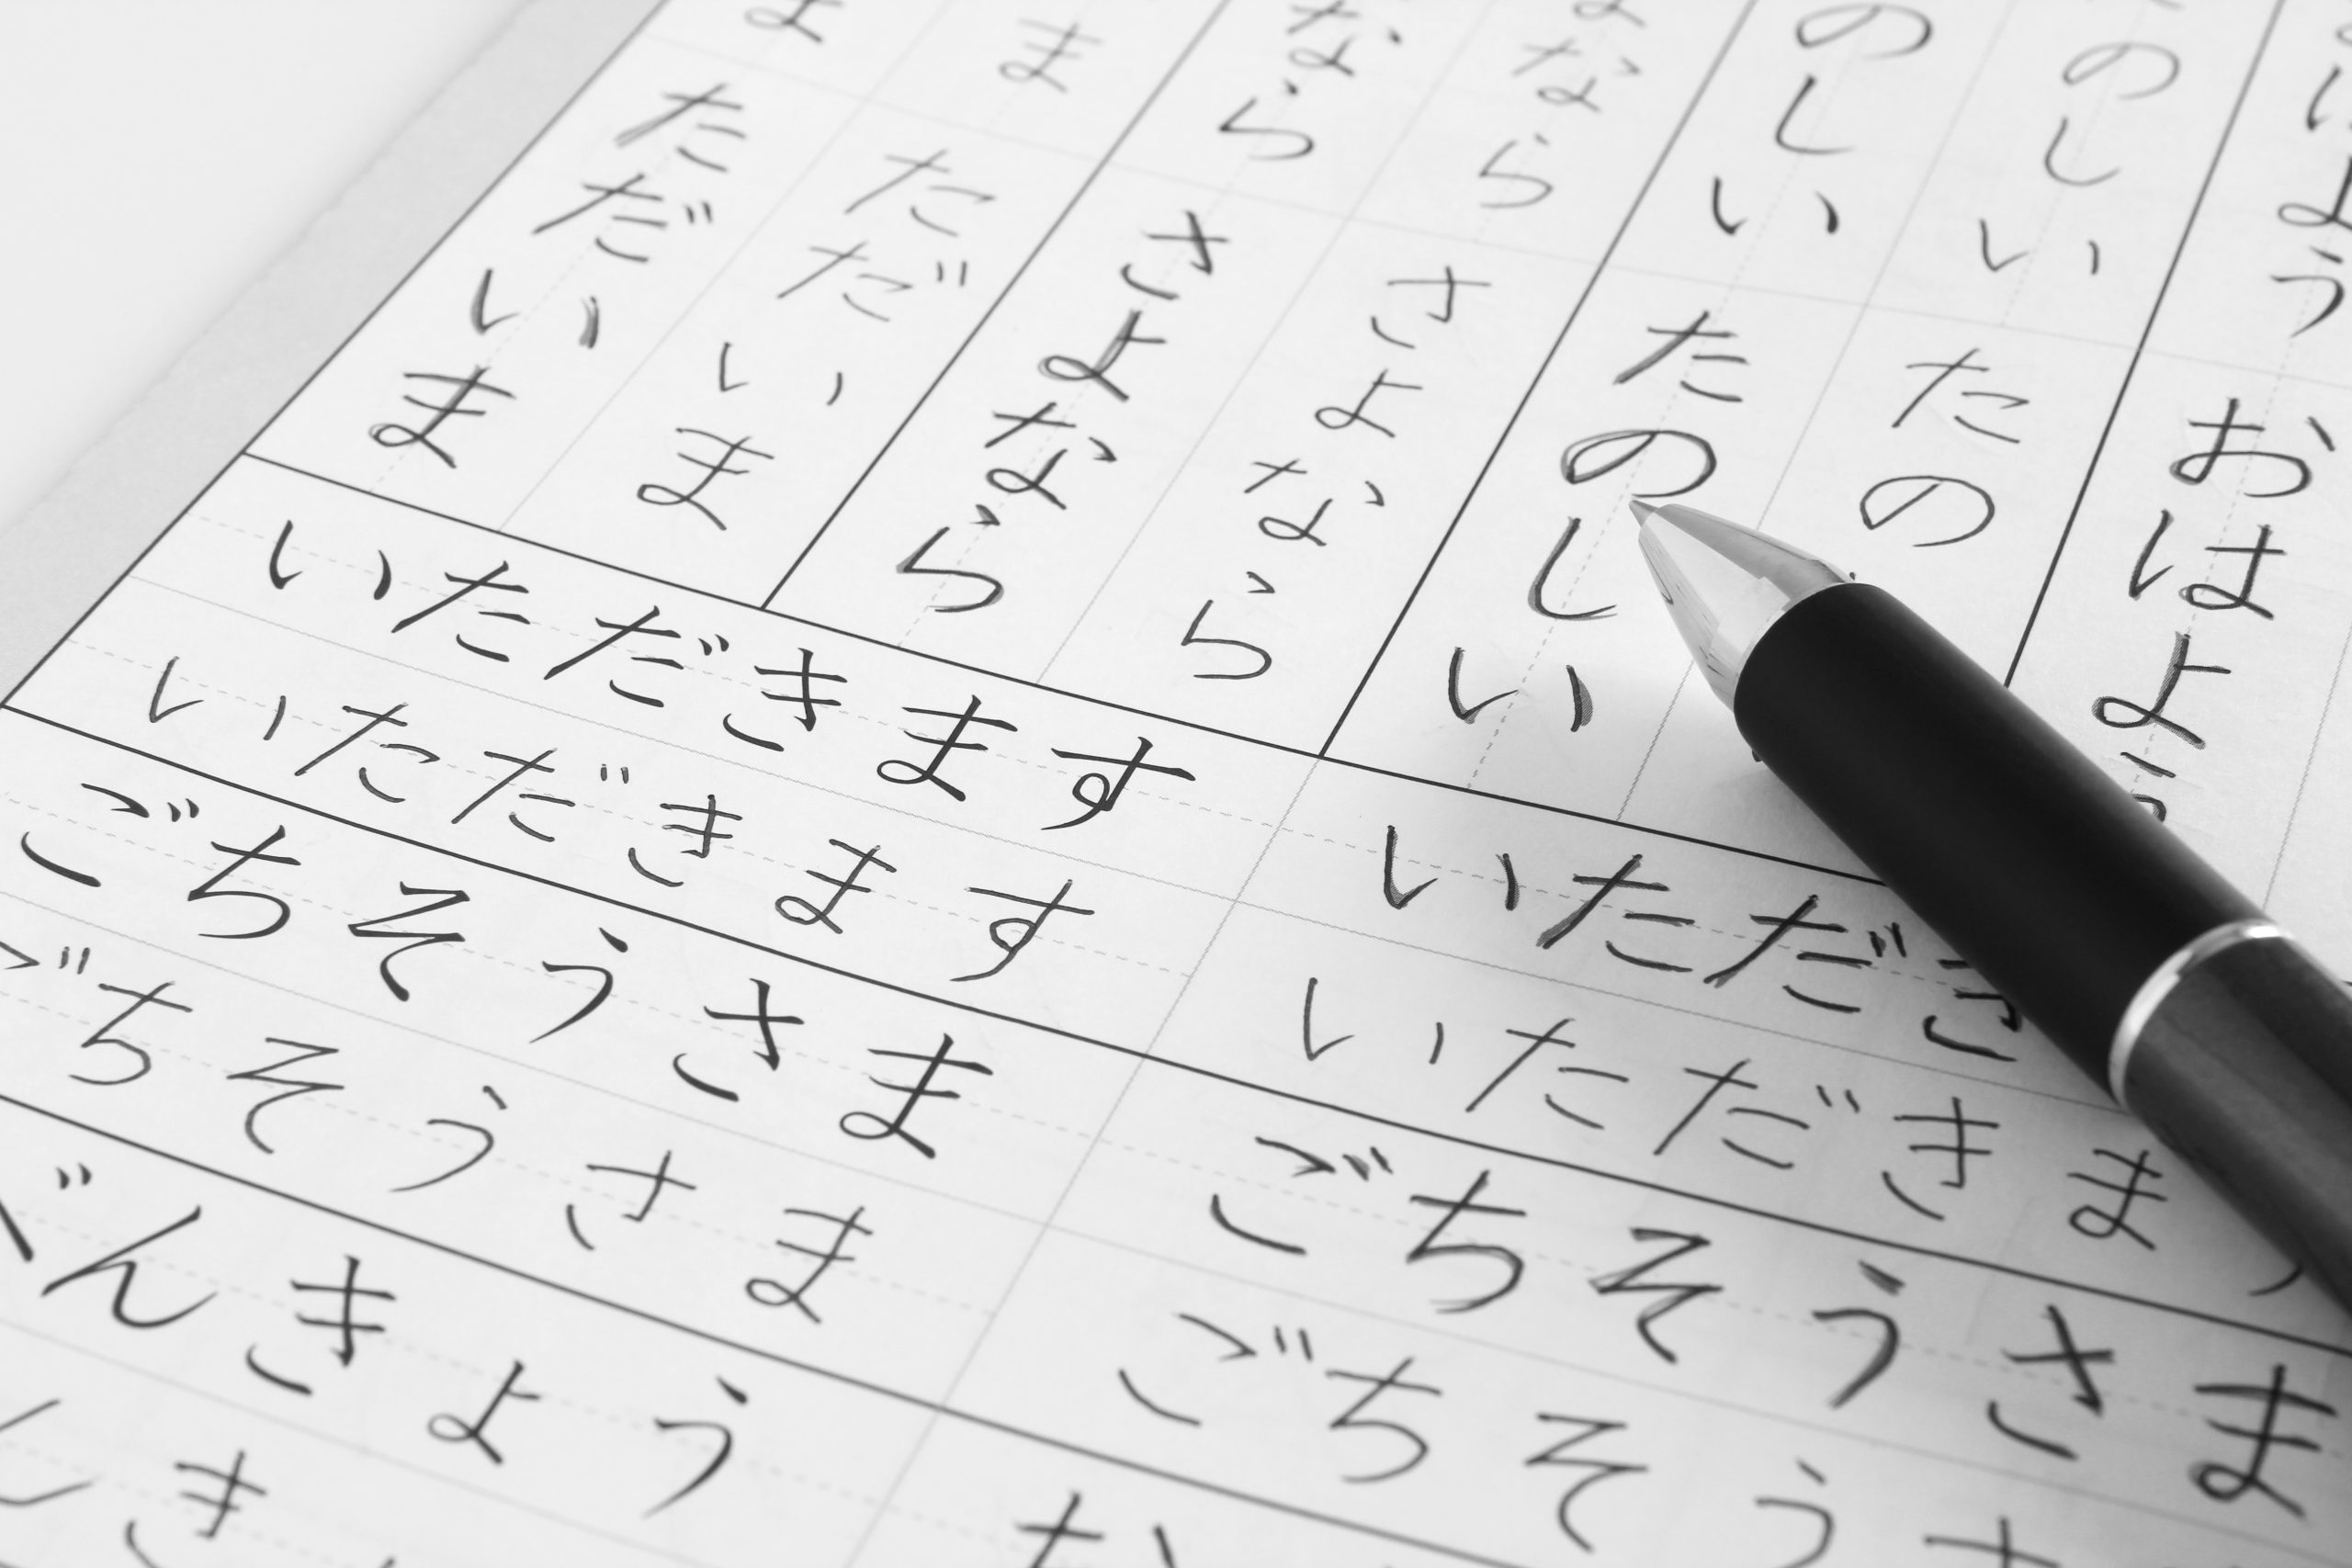 A Better Way to Learn Japanese: A Self-Study Guide - The Linguist Magazine